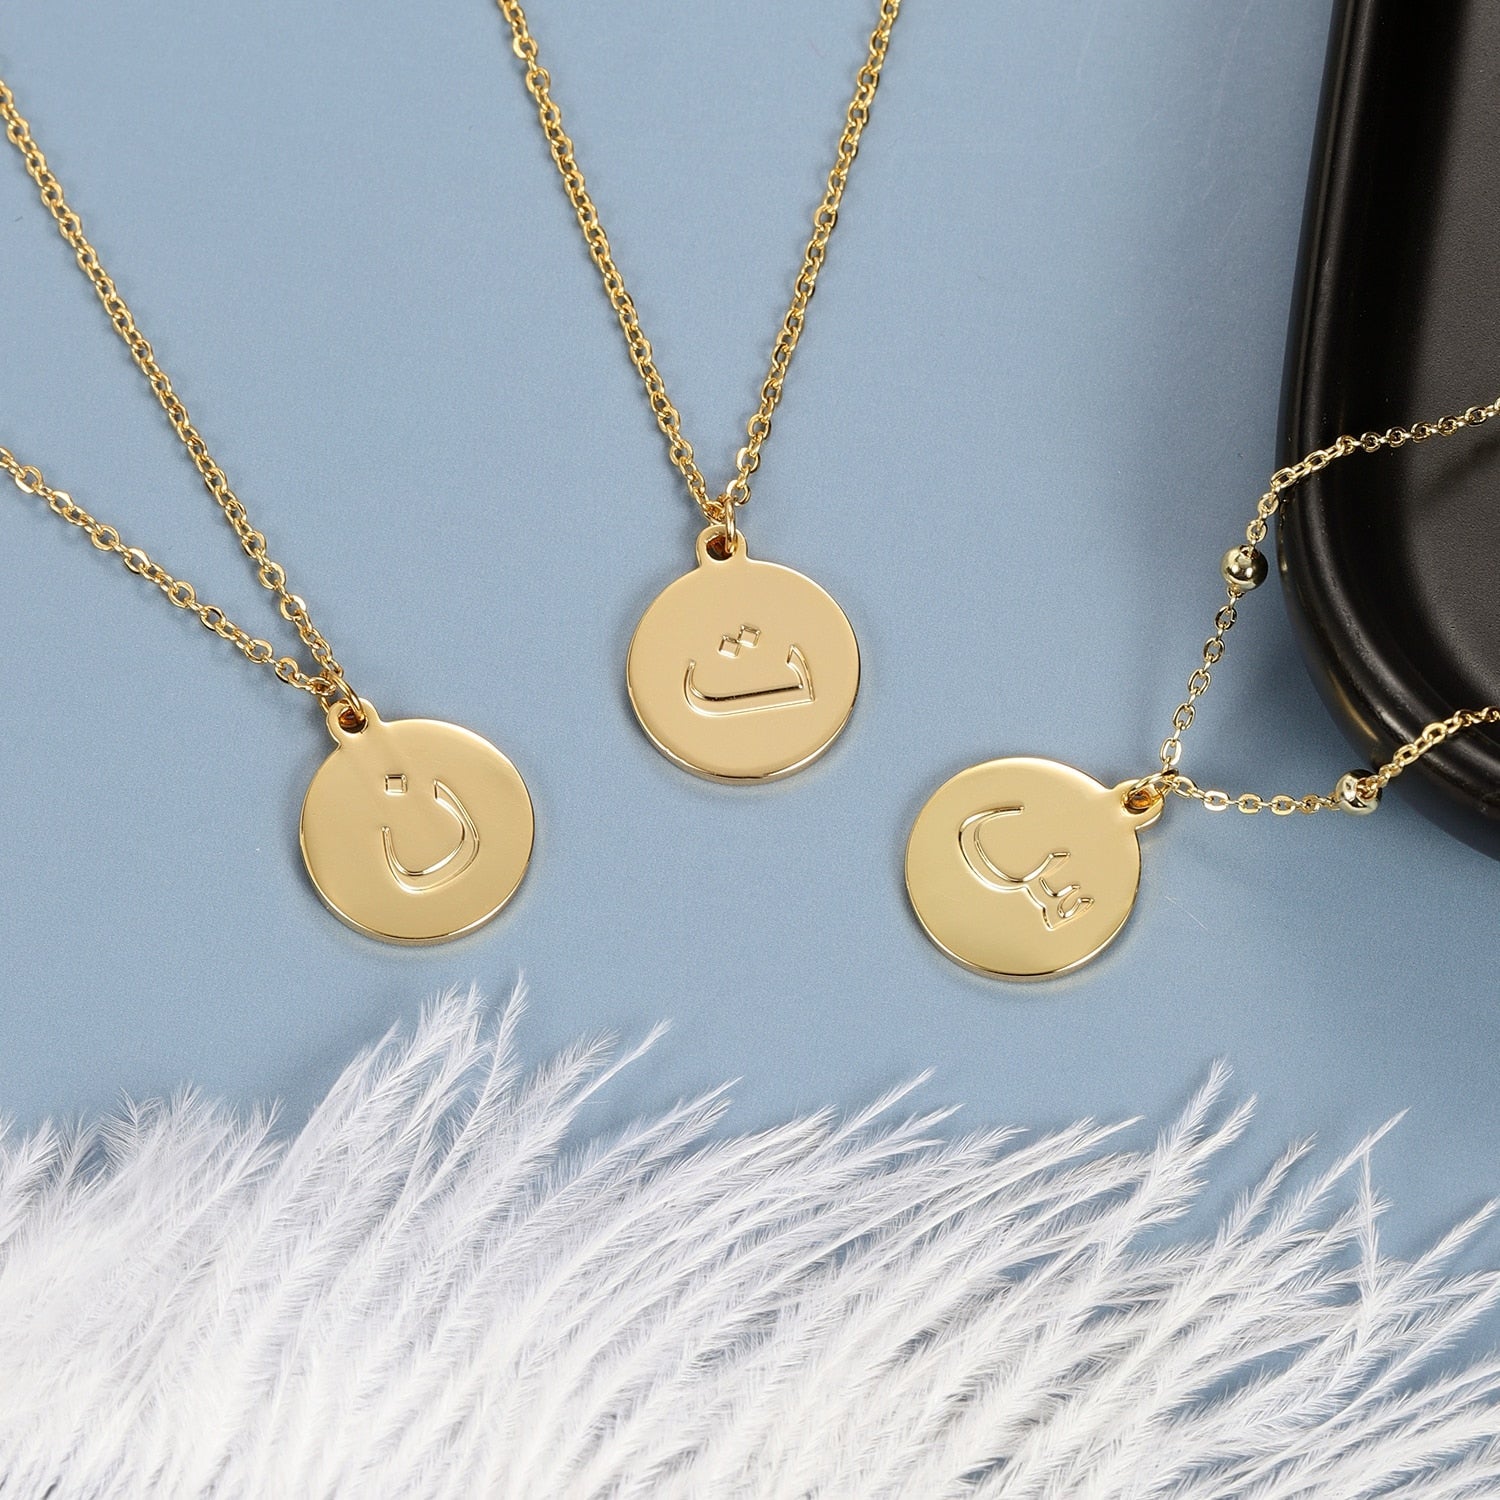 Arabic Letter Necklace - Limitless Jewellery